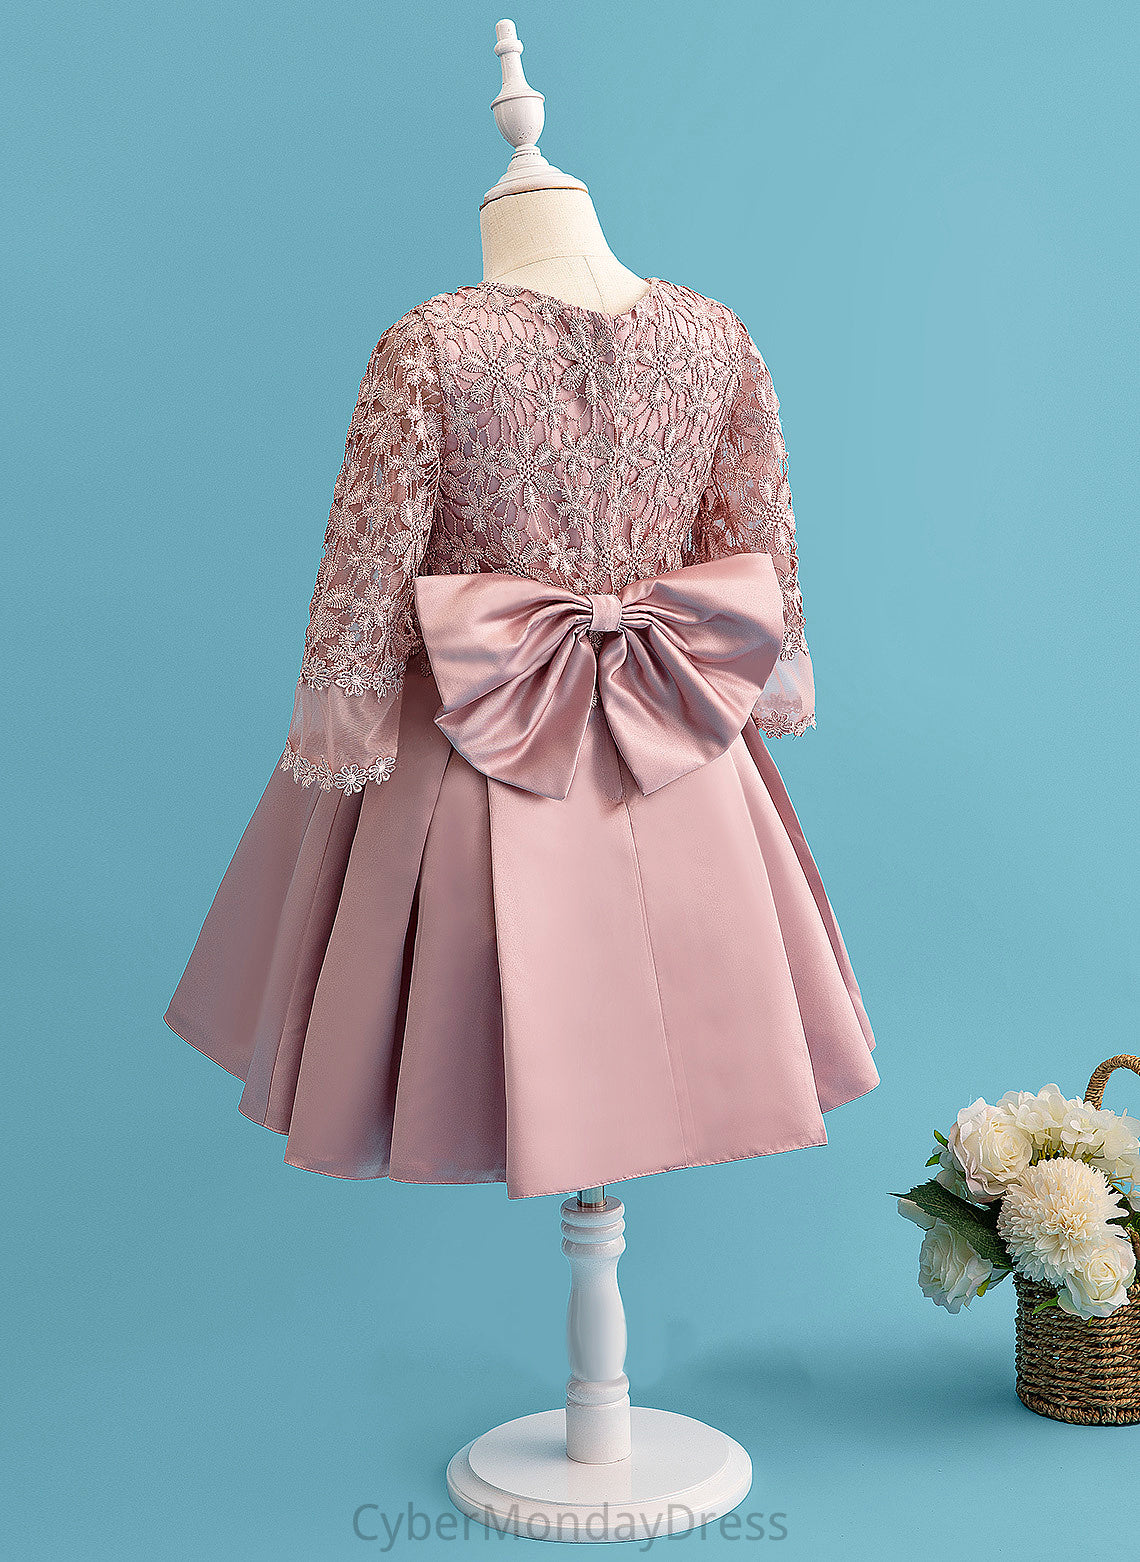 Leila - Flower Scoop Girl Knee-length A-Line With Long Sleeves Flower Girl Dresses Satin/Lace Bow(s) Neck Dress